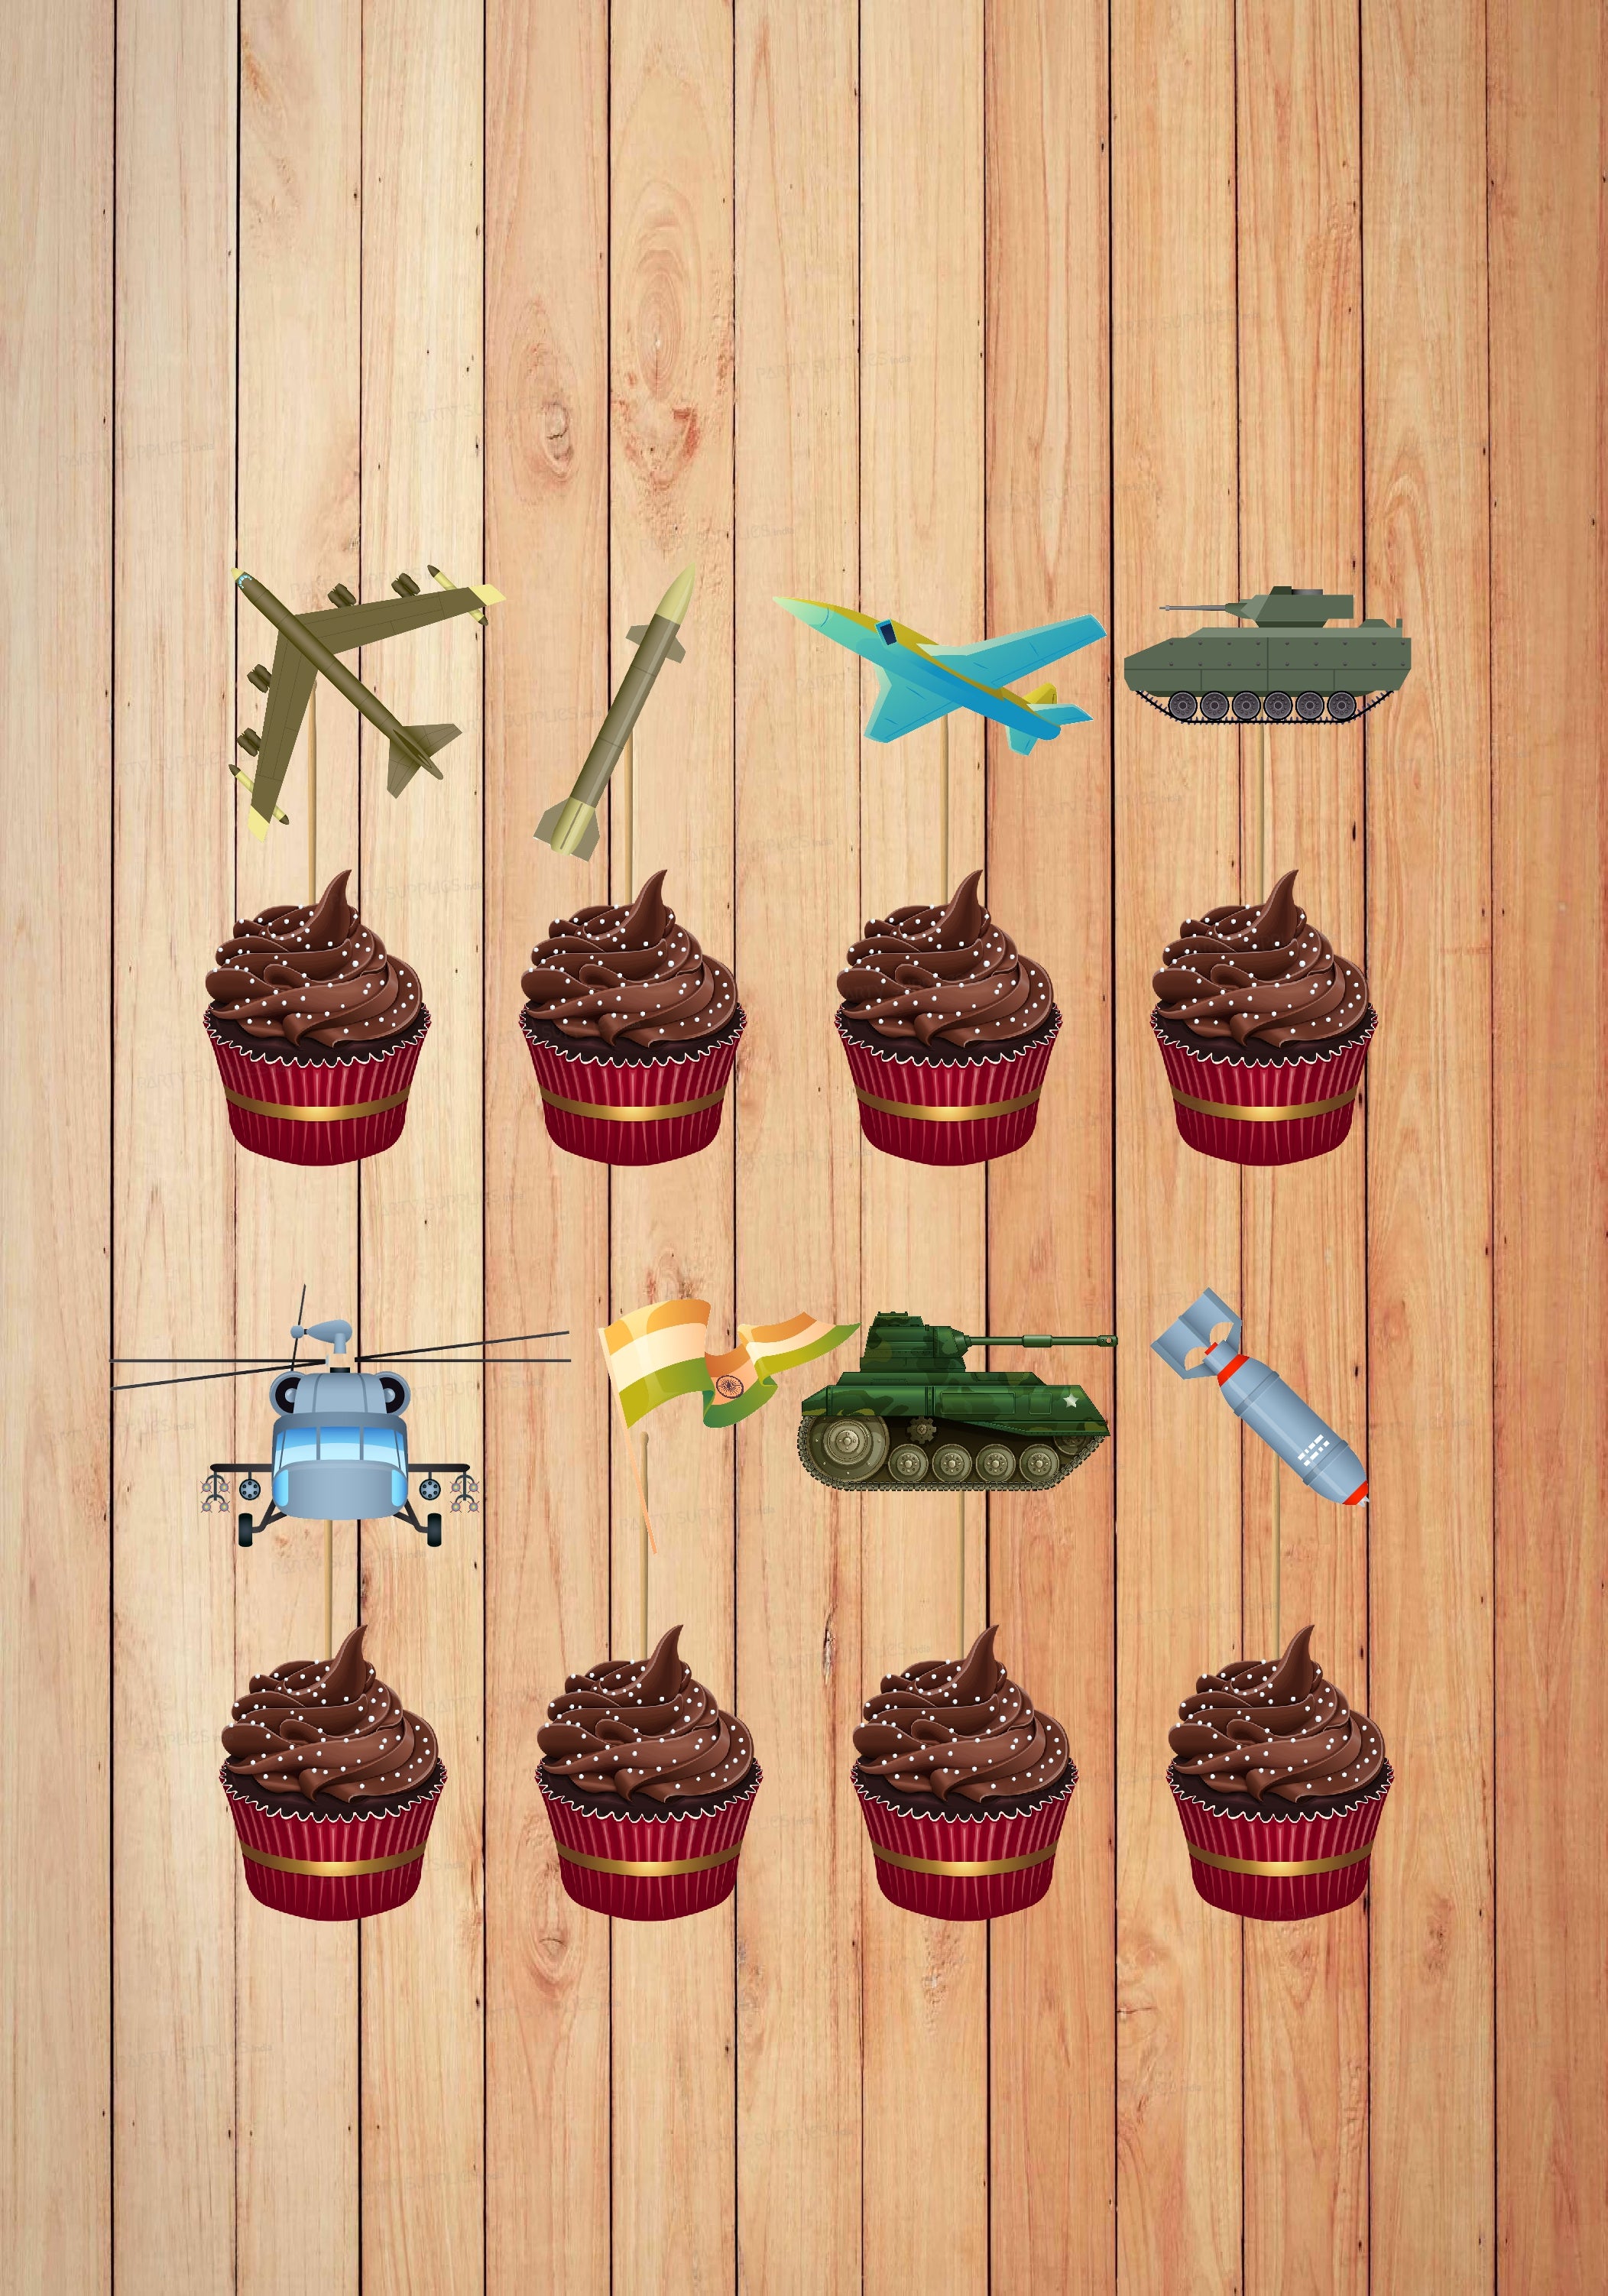 PSI  Military Theme Customized Cup Cake Topper